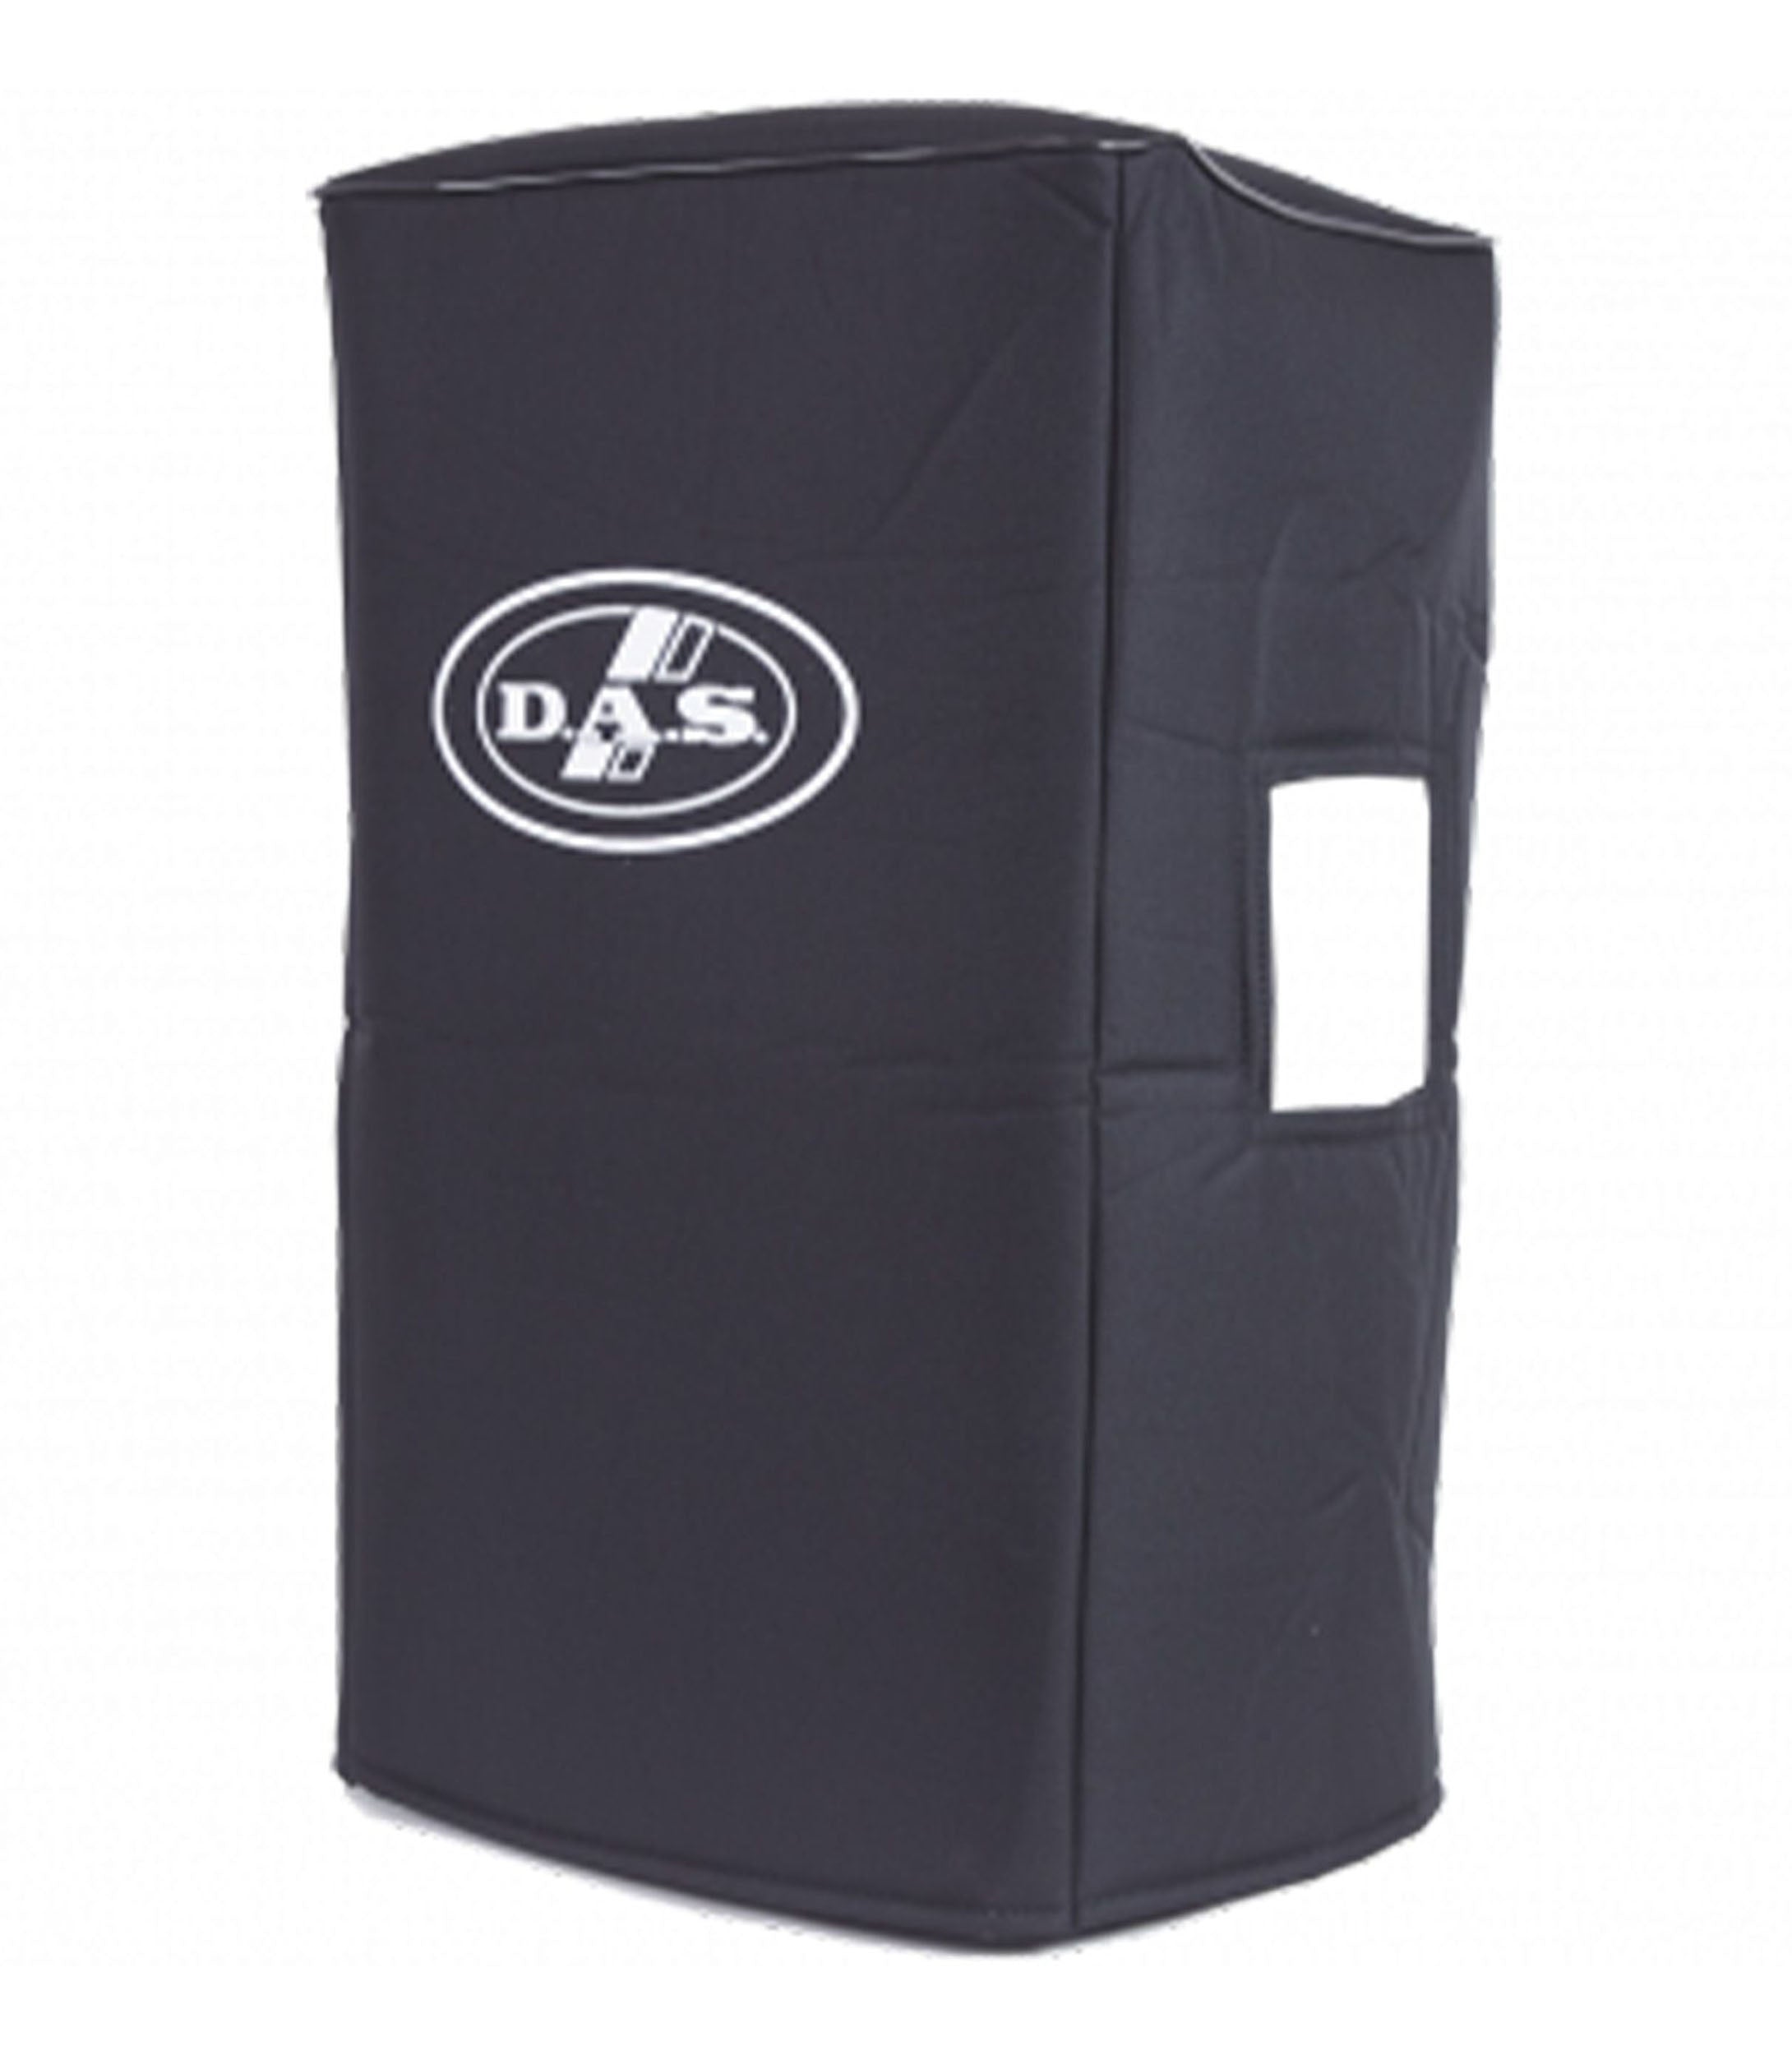 DAS Audio CVR-ALTEA-15, Protective Transport Cover for Altea-415 and Action-715 Powered Systems - Black by DAS Audio